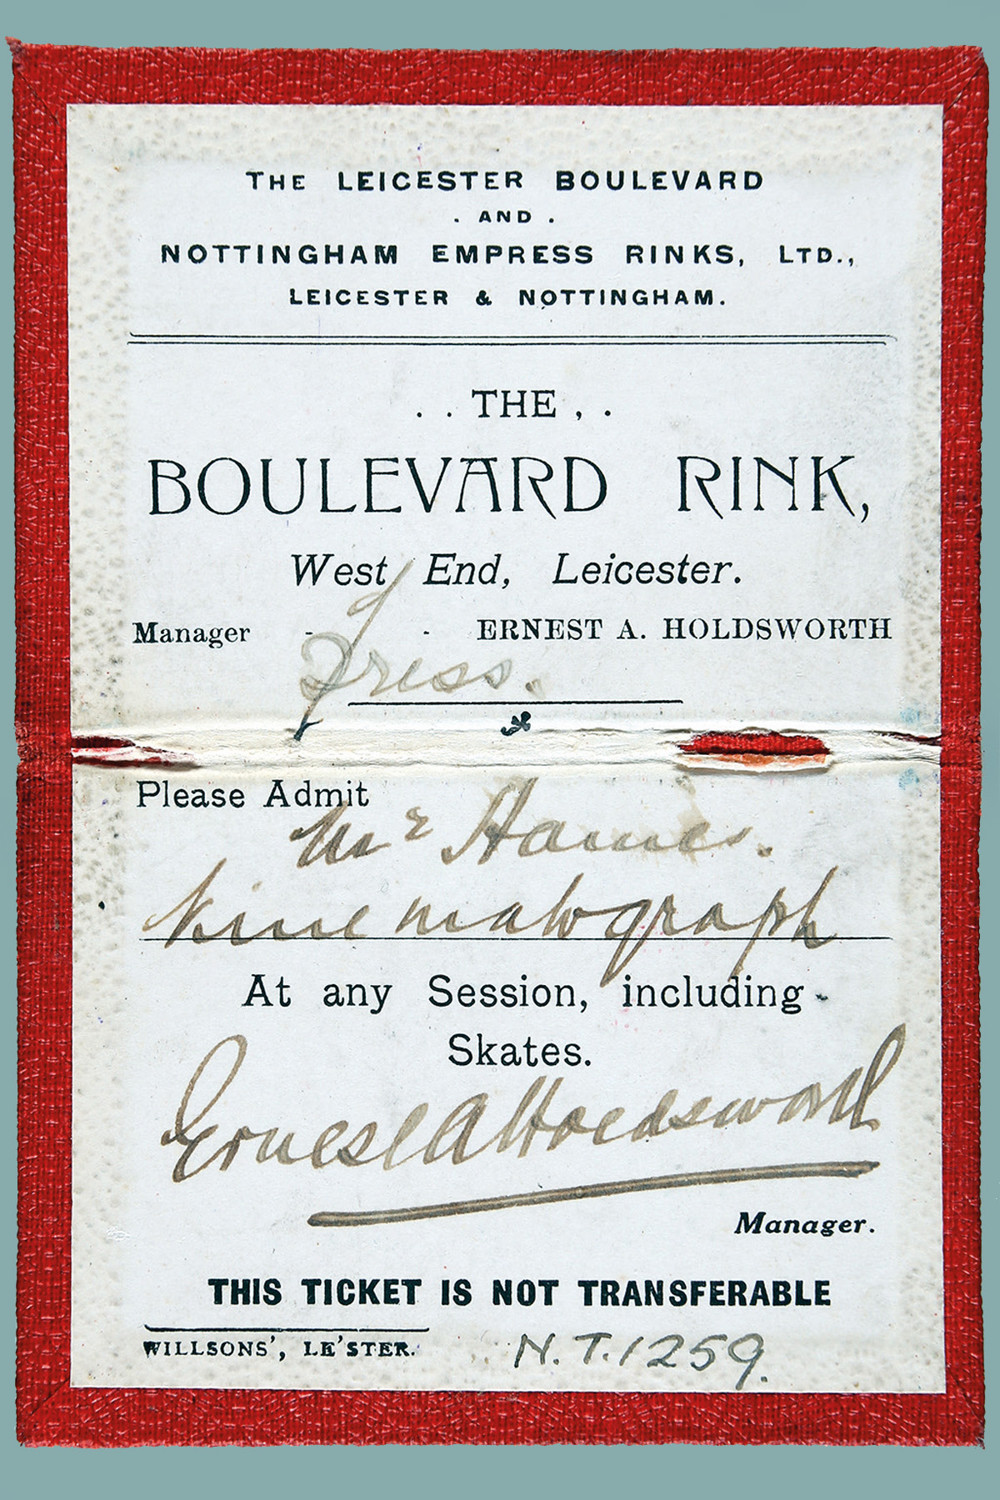 Inside a ticket for The Boulevard Rink.